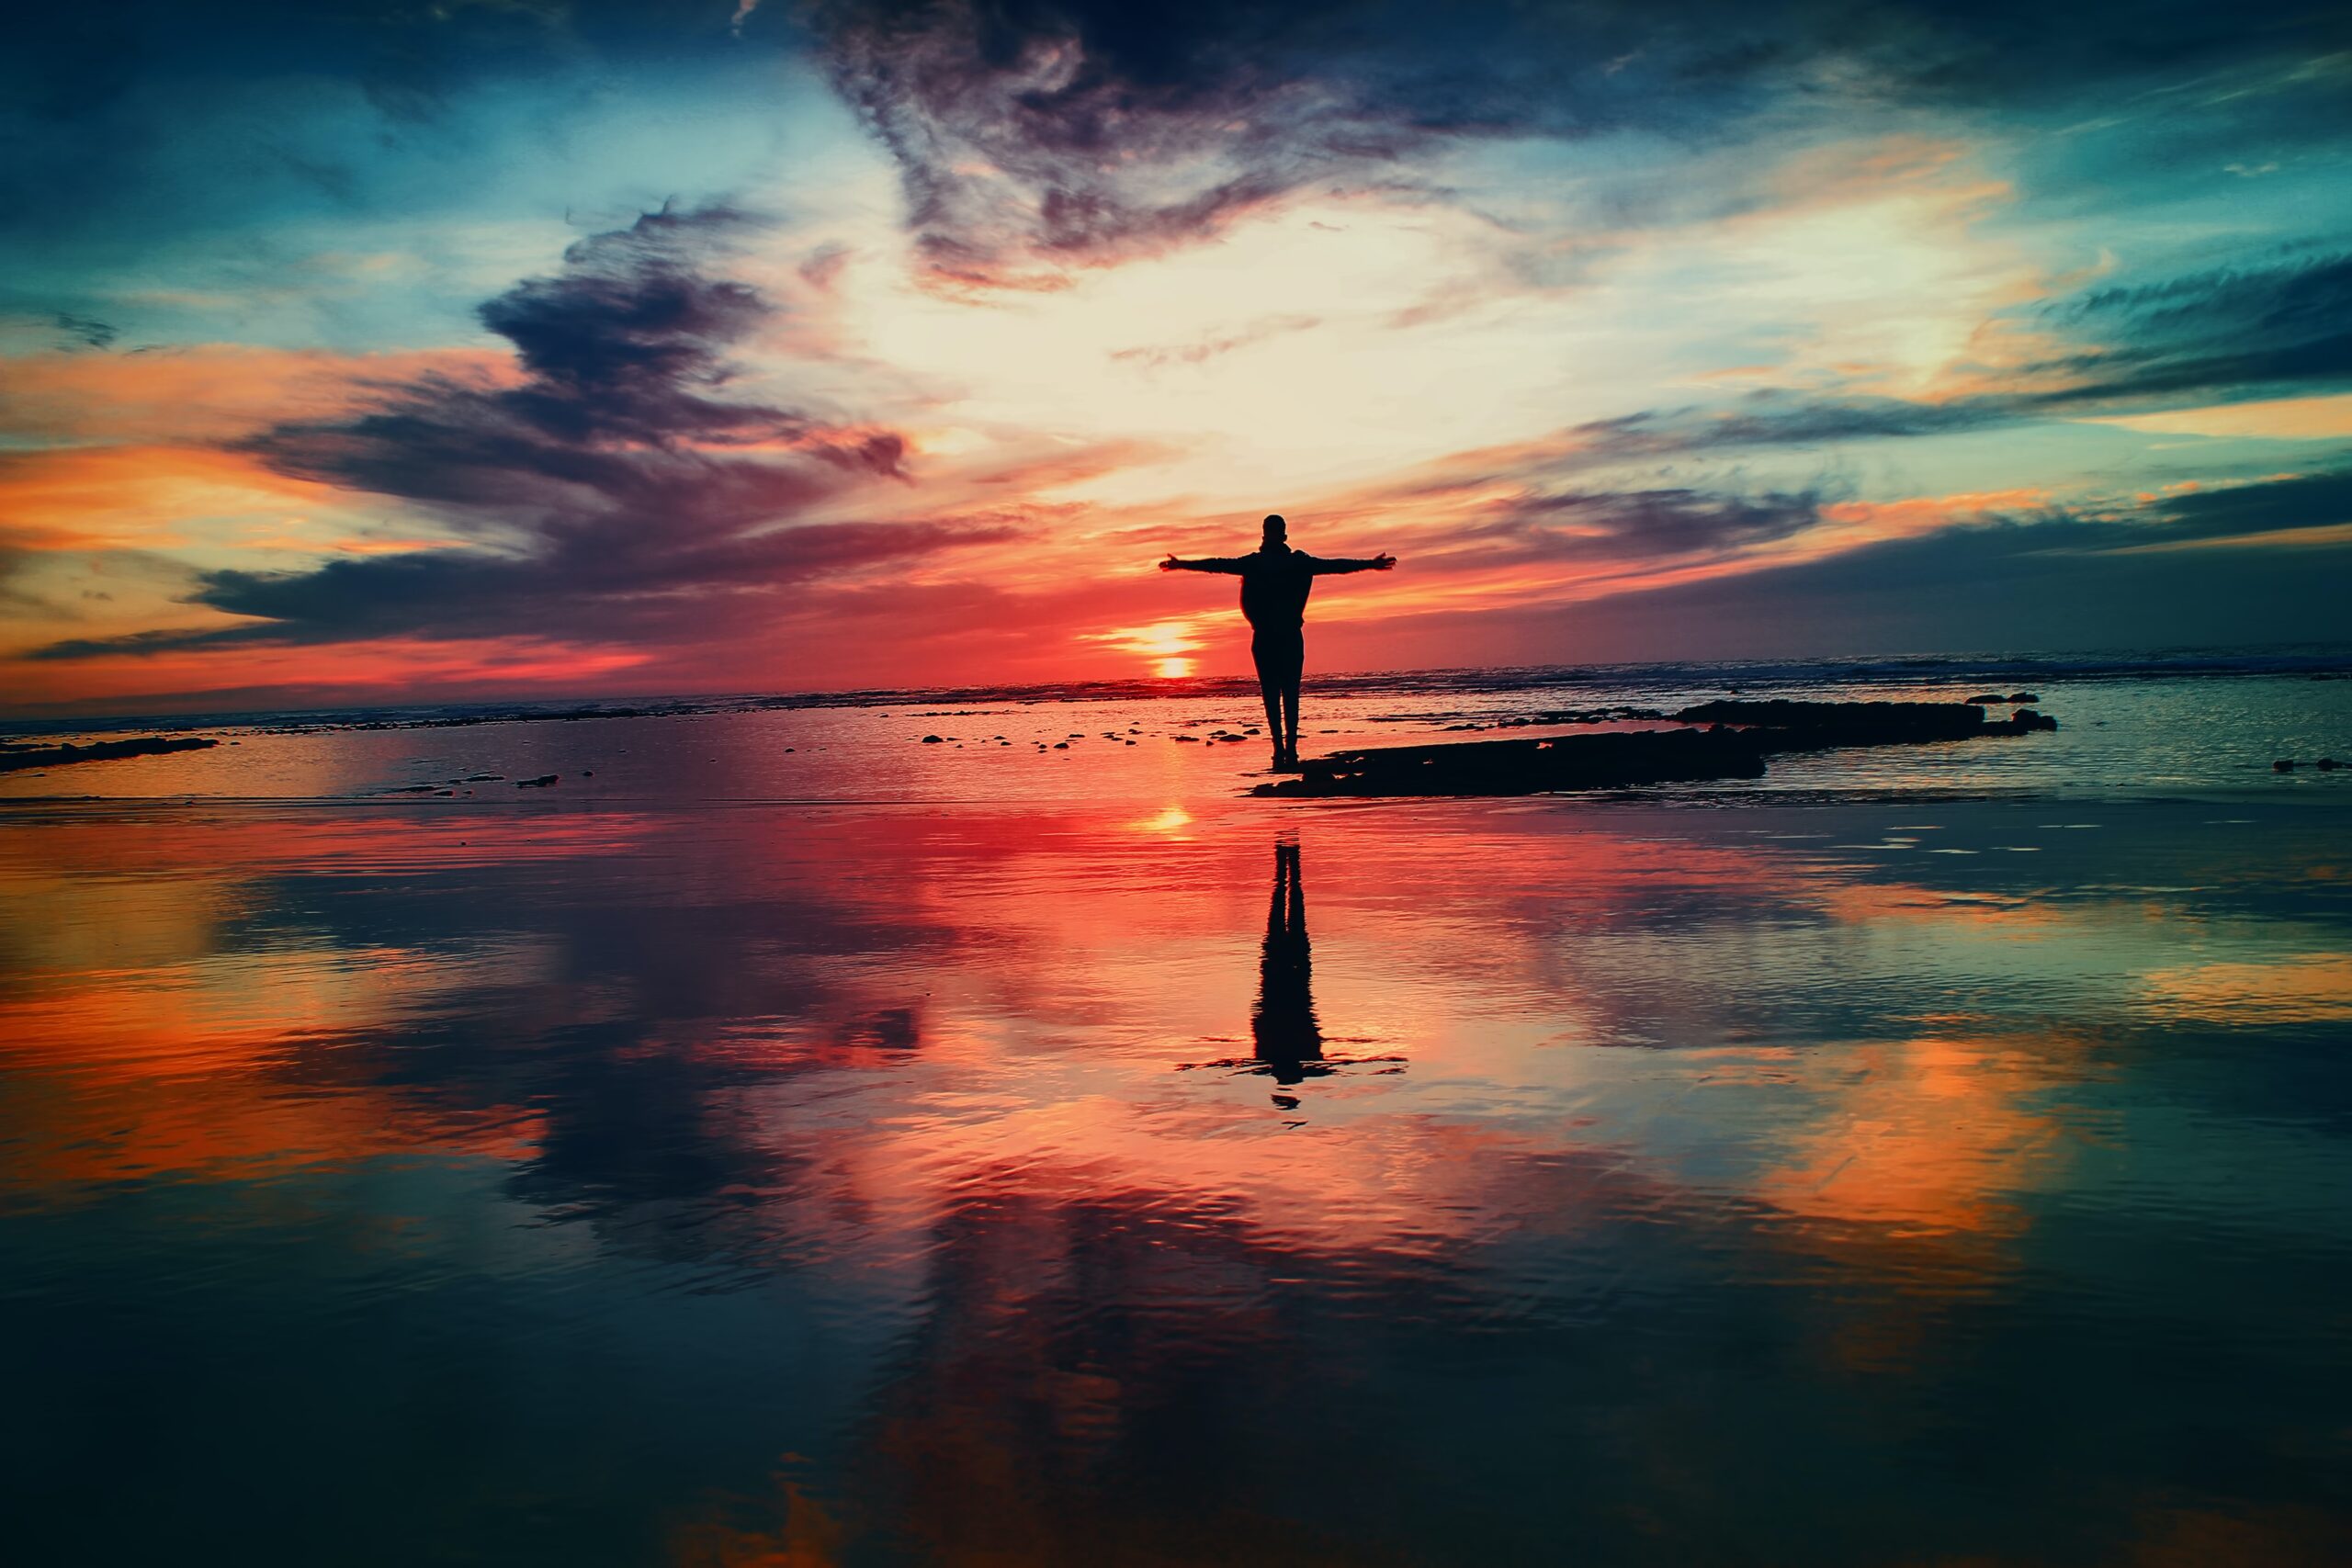 multicoloured scene of man with outstretched arms on a beach